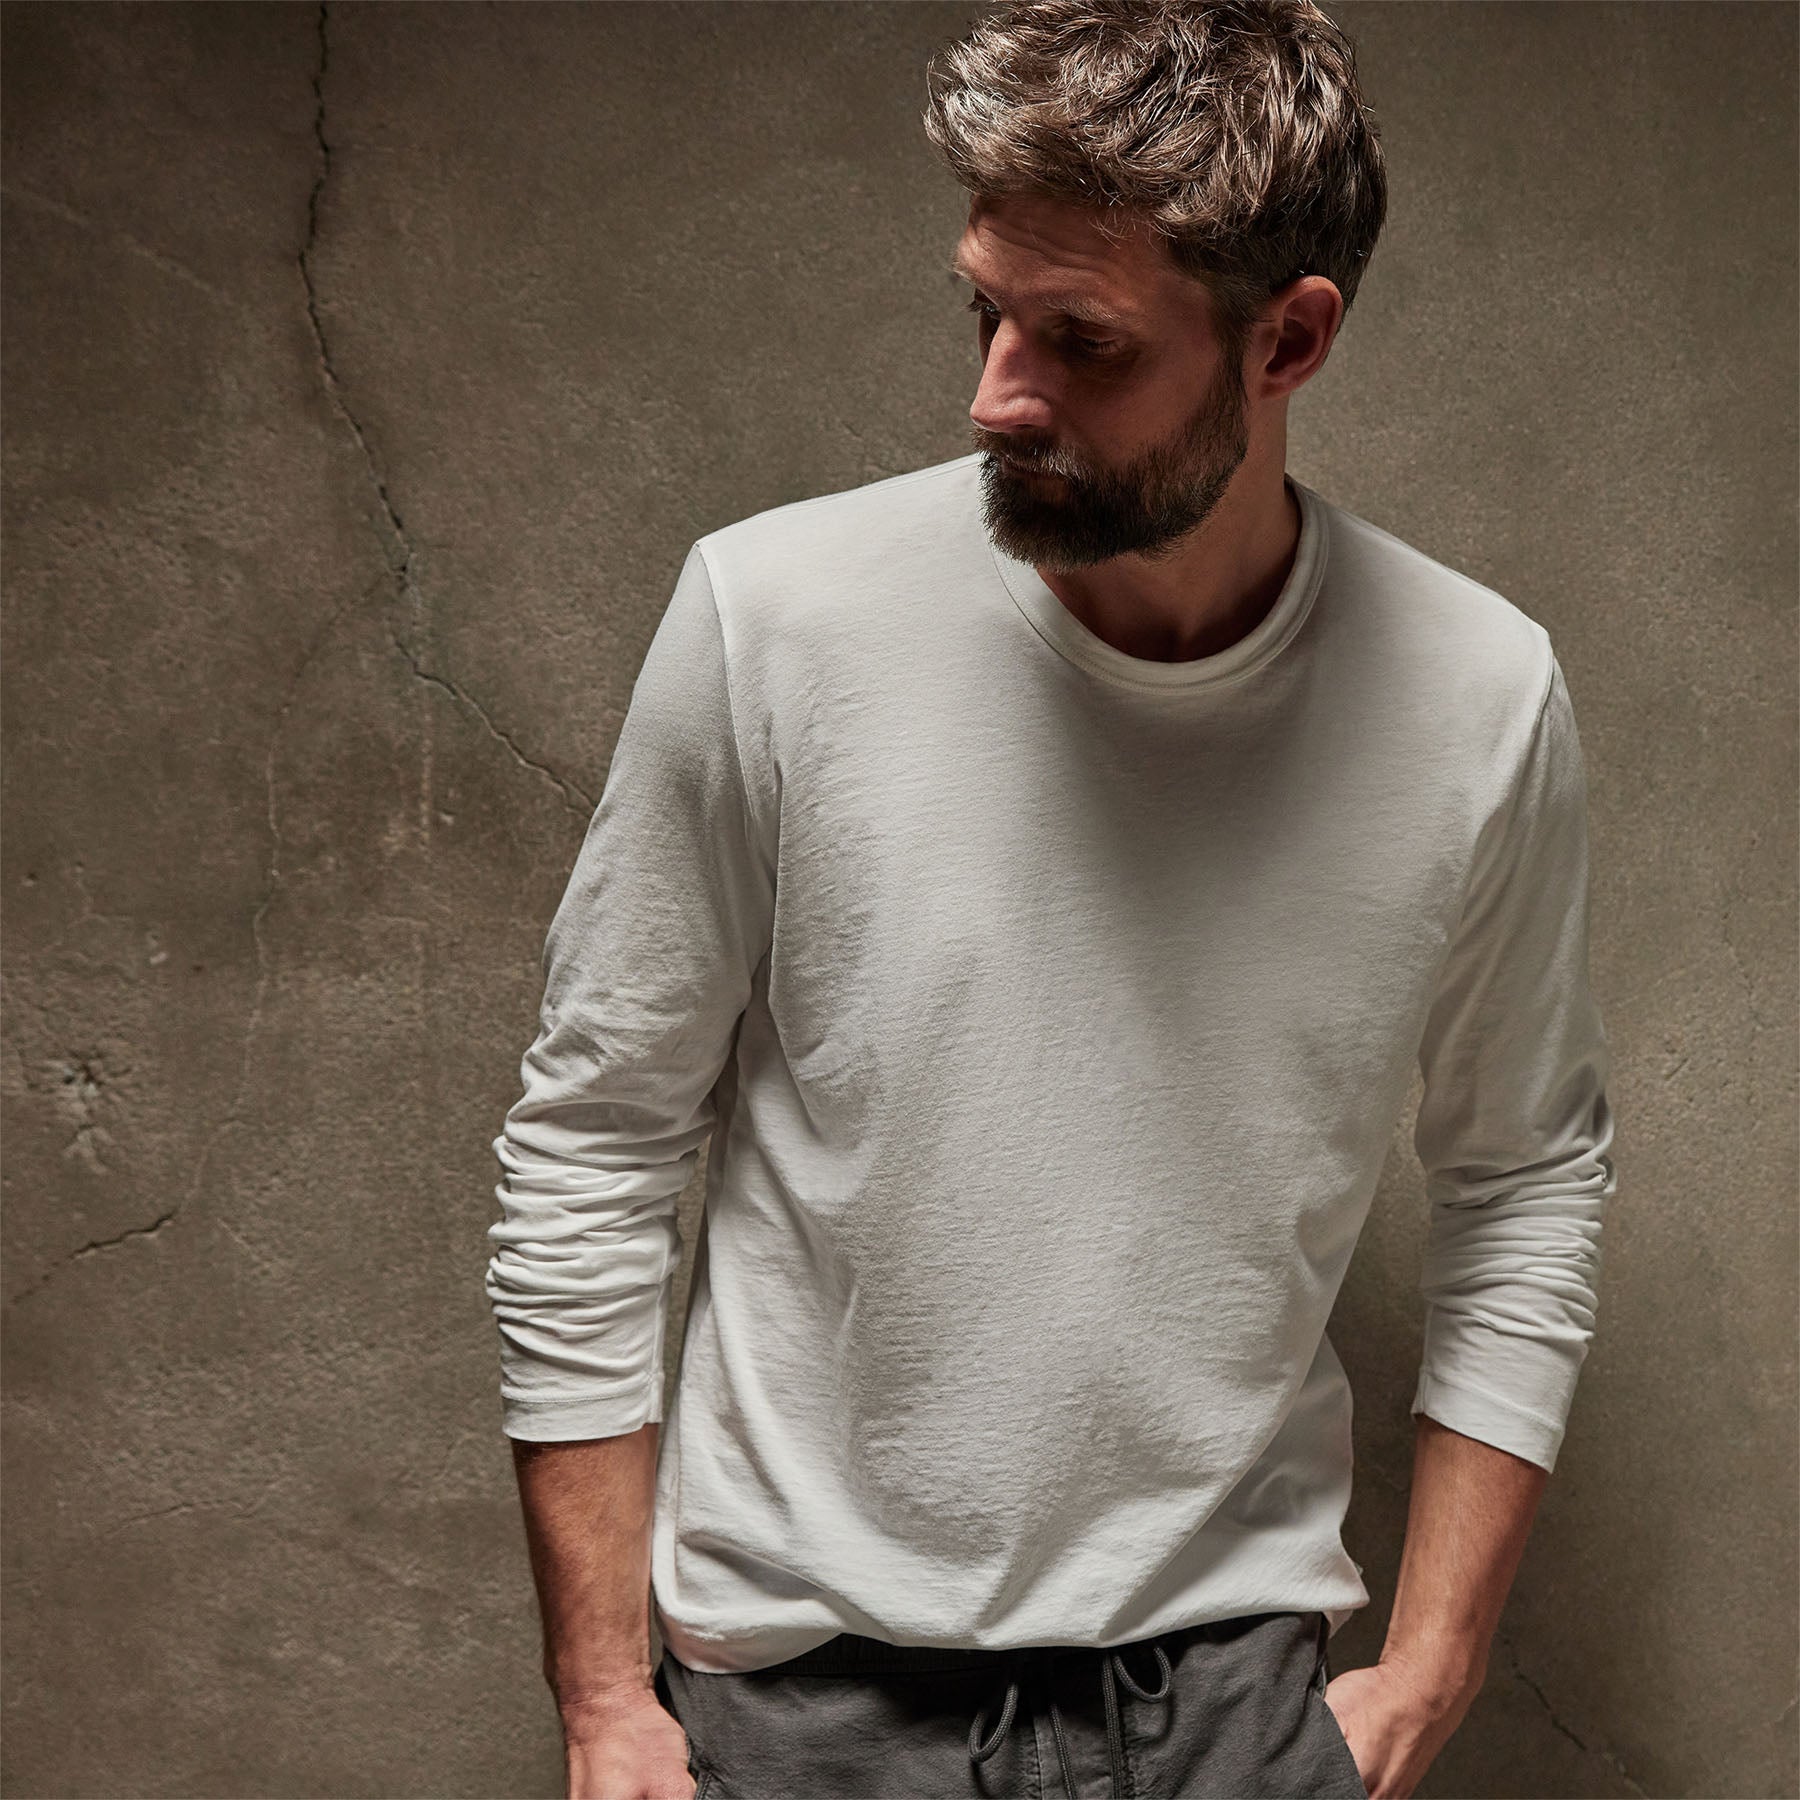 Check styling ideas for「Sweatpants、Soft Knitted Fleece Crew Neck  Long-Sleeve T-Shirt」